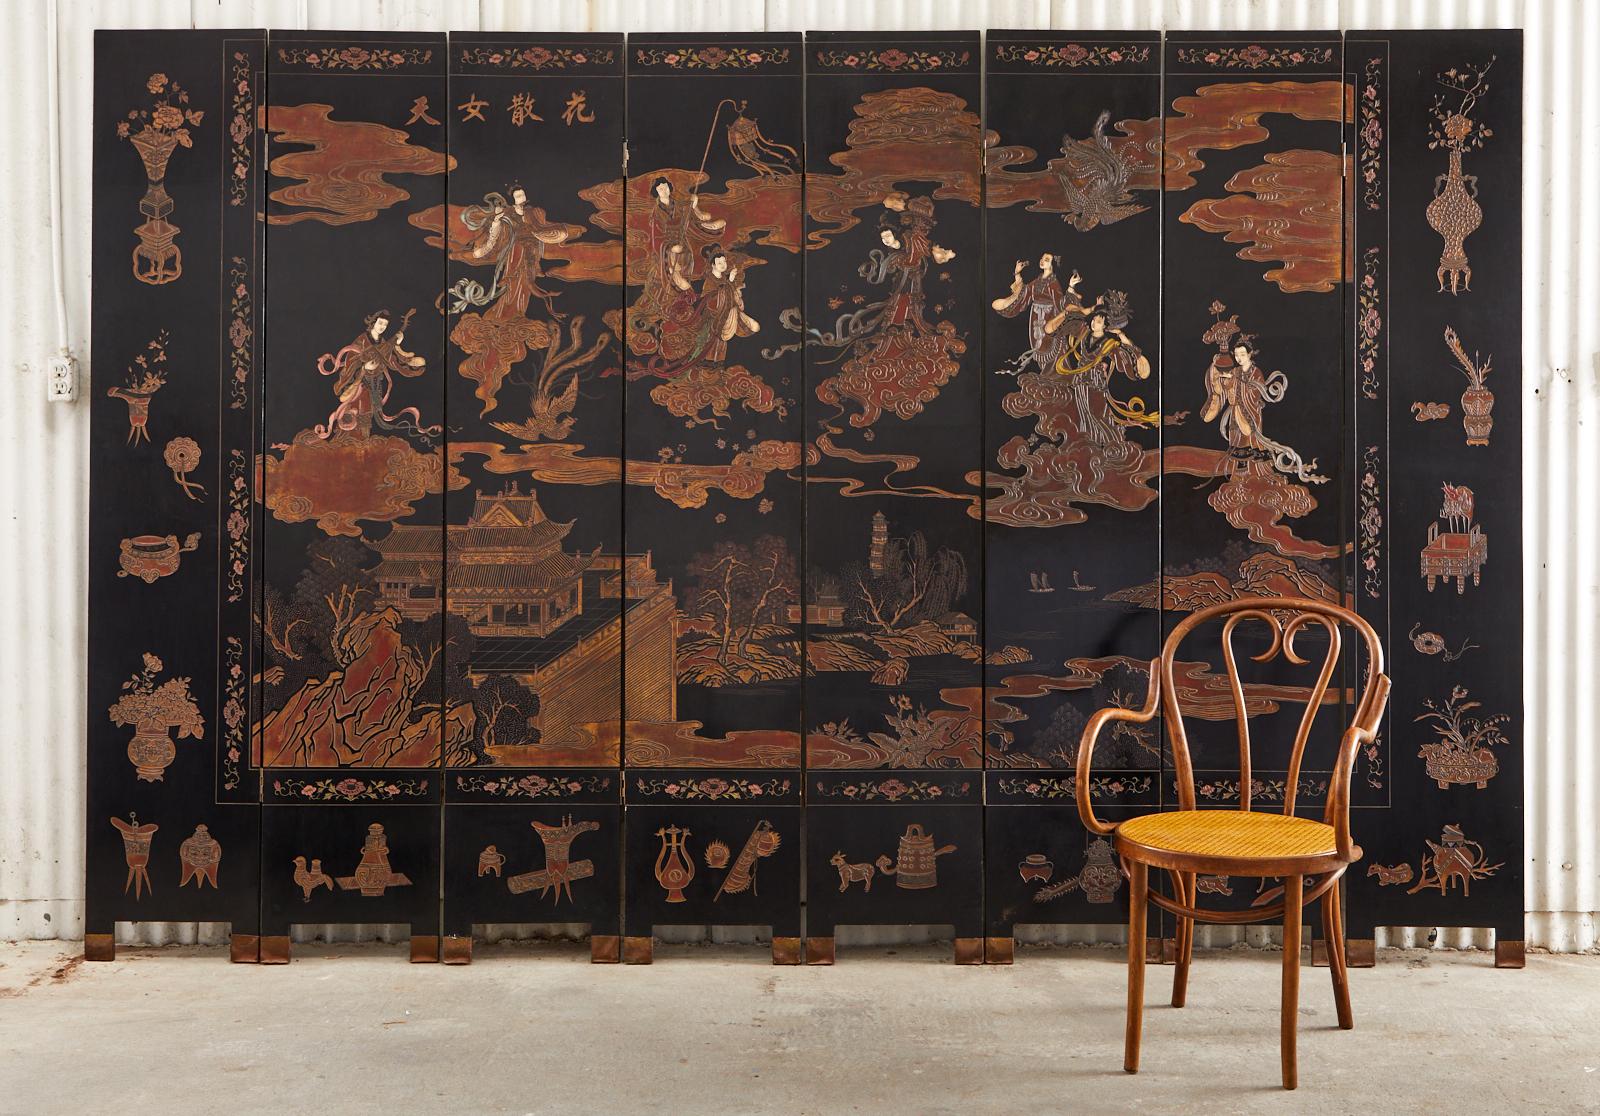 Divine Chinese export eight-panel coromandel screen depicting the Chinese mythological daoist character Xiwangmu and her heavenly entourage. Beautifully detailed with flowing robes and stylized clouds on the main scene. Bordered by scholars objects